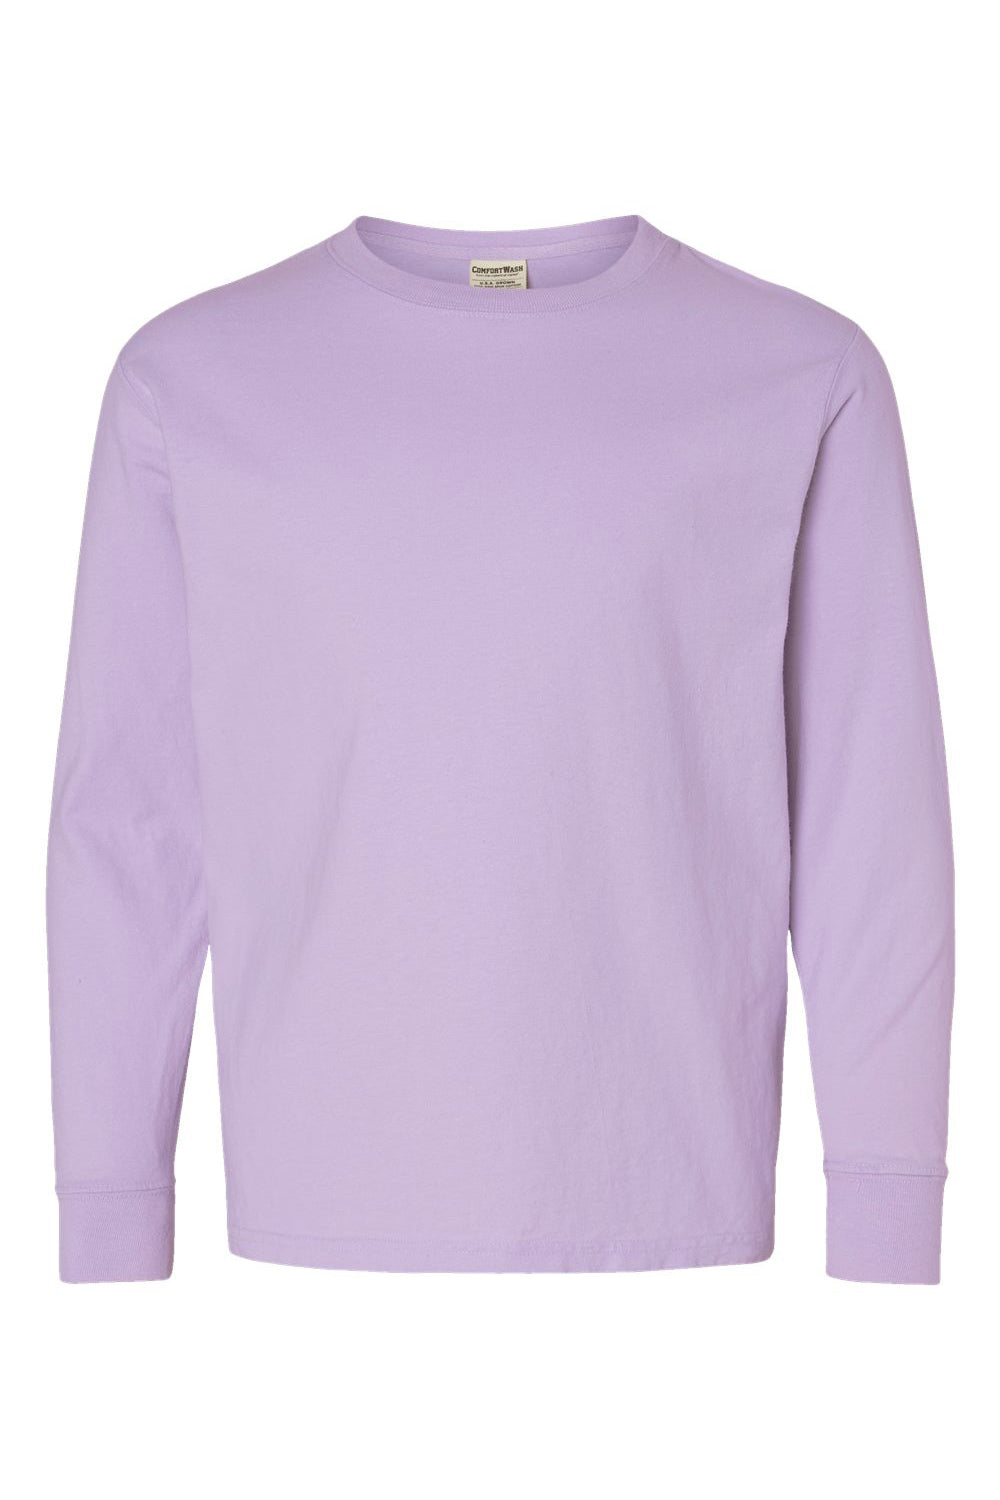 ComfortWash By Hanes GDH275 Youth Garment Dyed Long Sleeve Crewneck T-Shirt Future Lavender Purple Flat Front